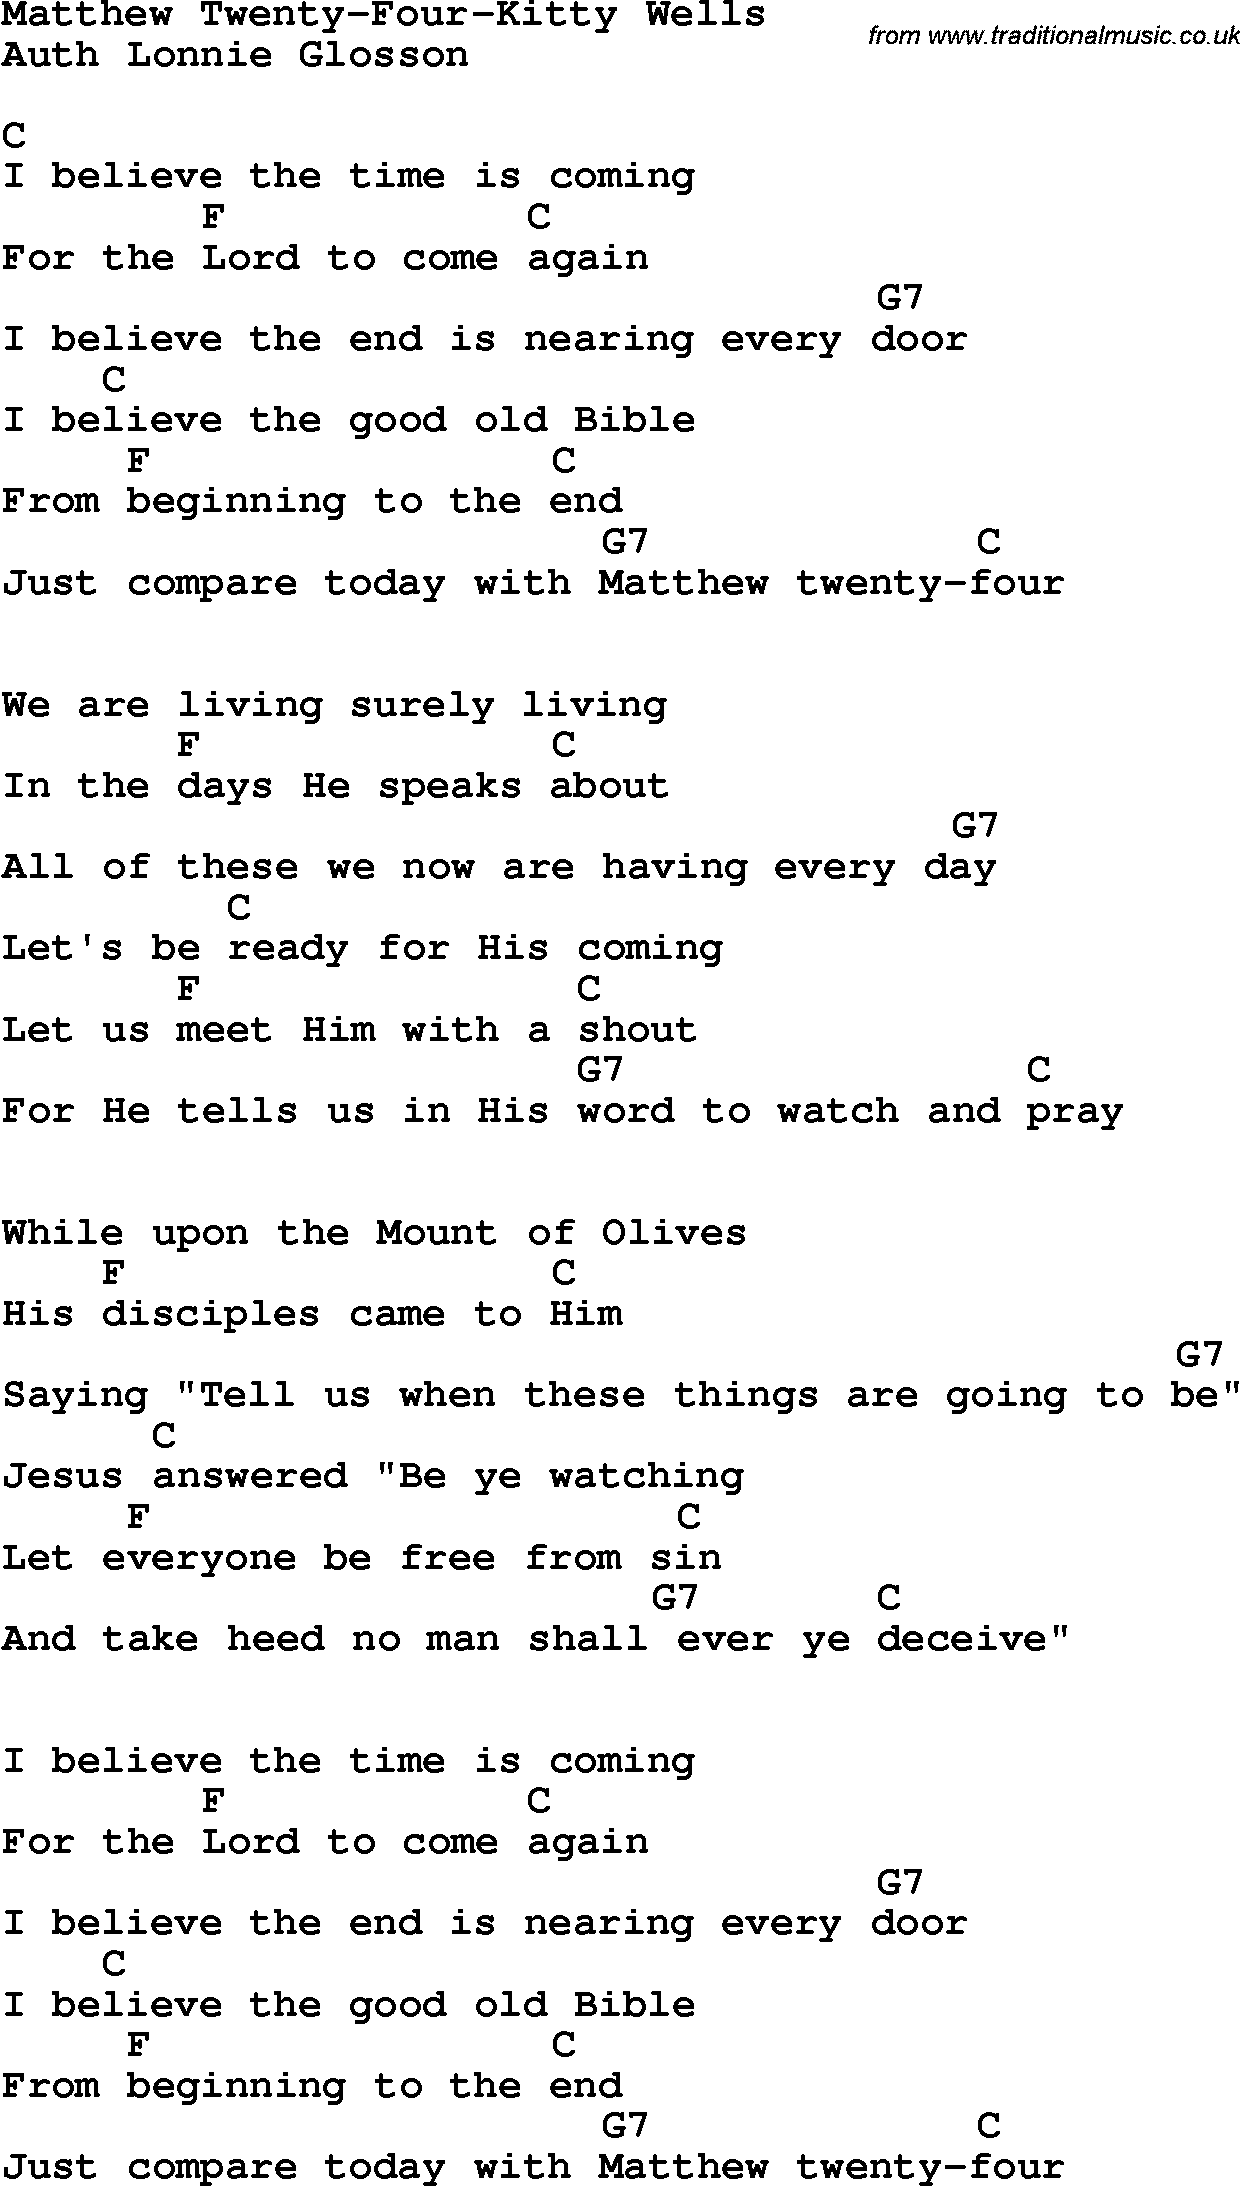 Country, Southern and Bluegrass Gospel Song Matthew Twenty-Four-Kitty Wells lyrics and chords